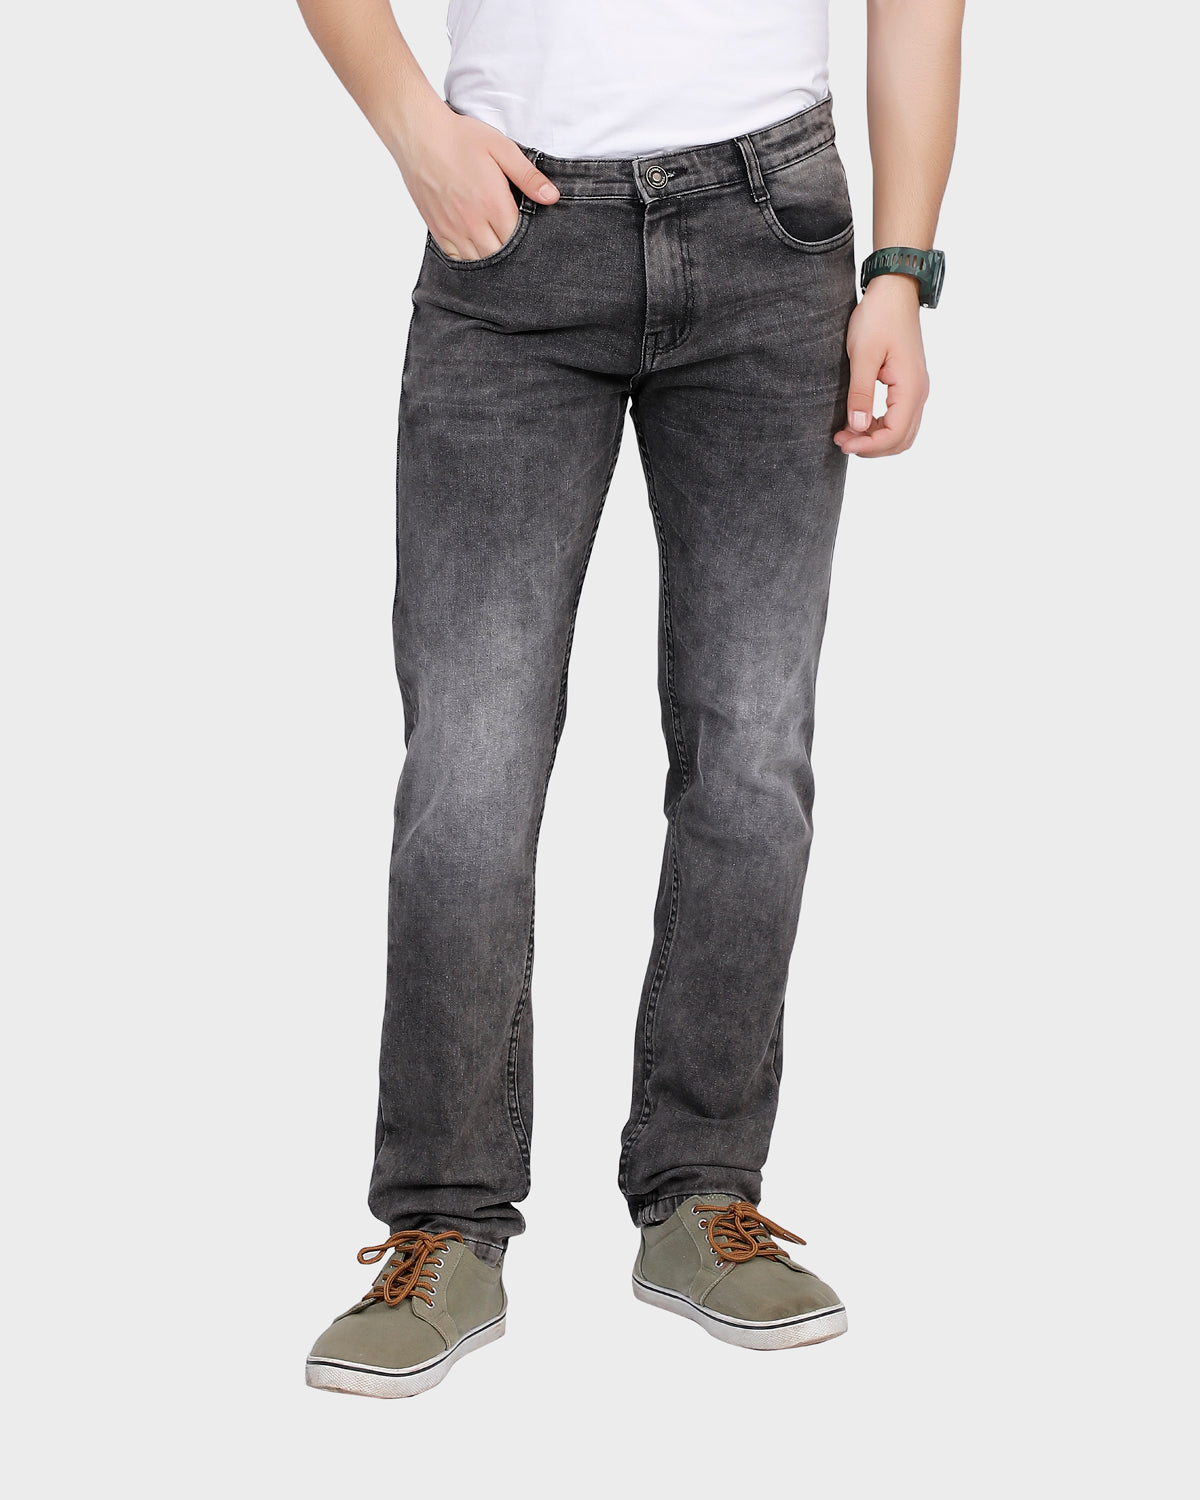 Lightly Washed Charcoal Jeans